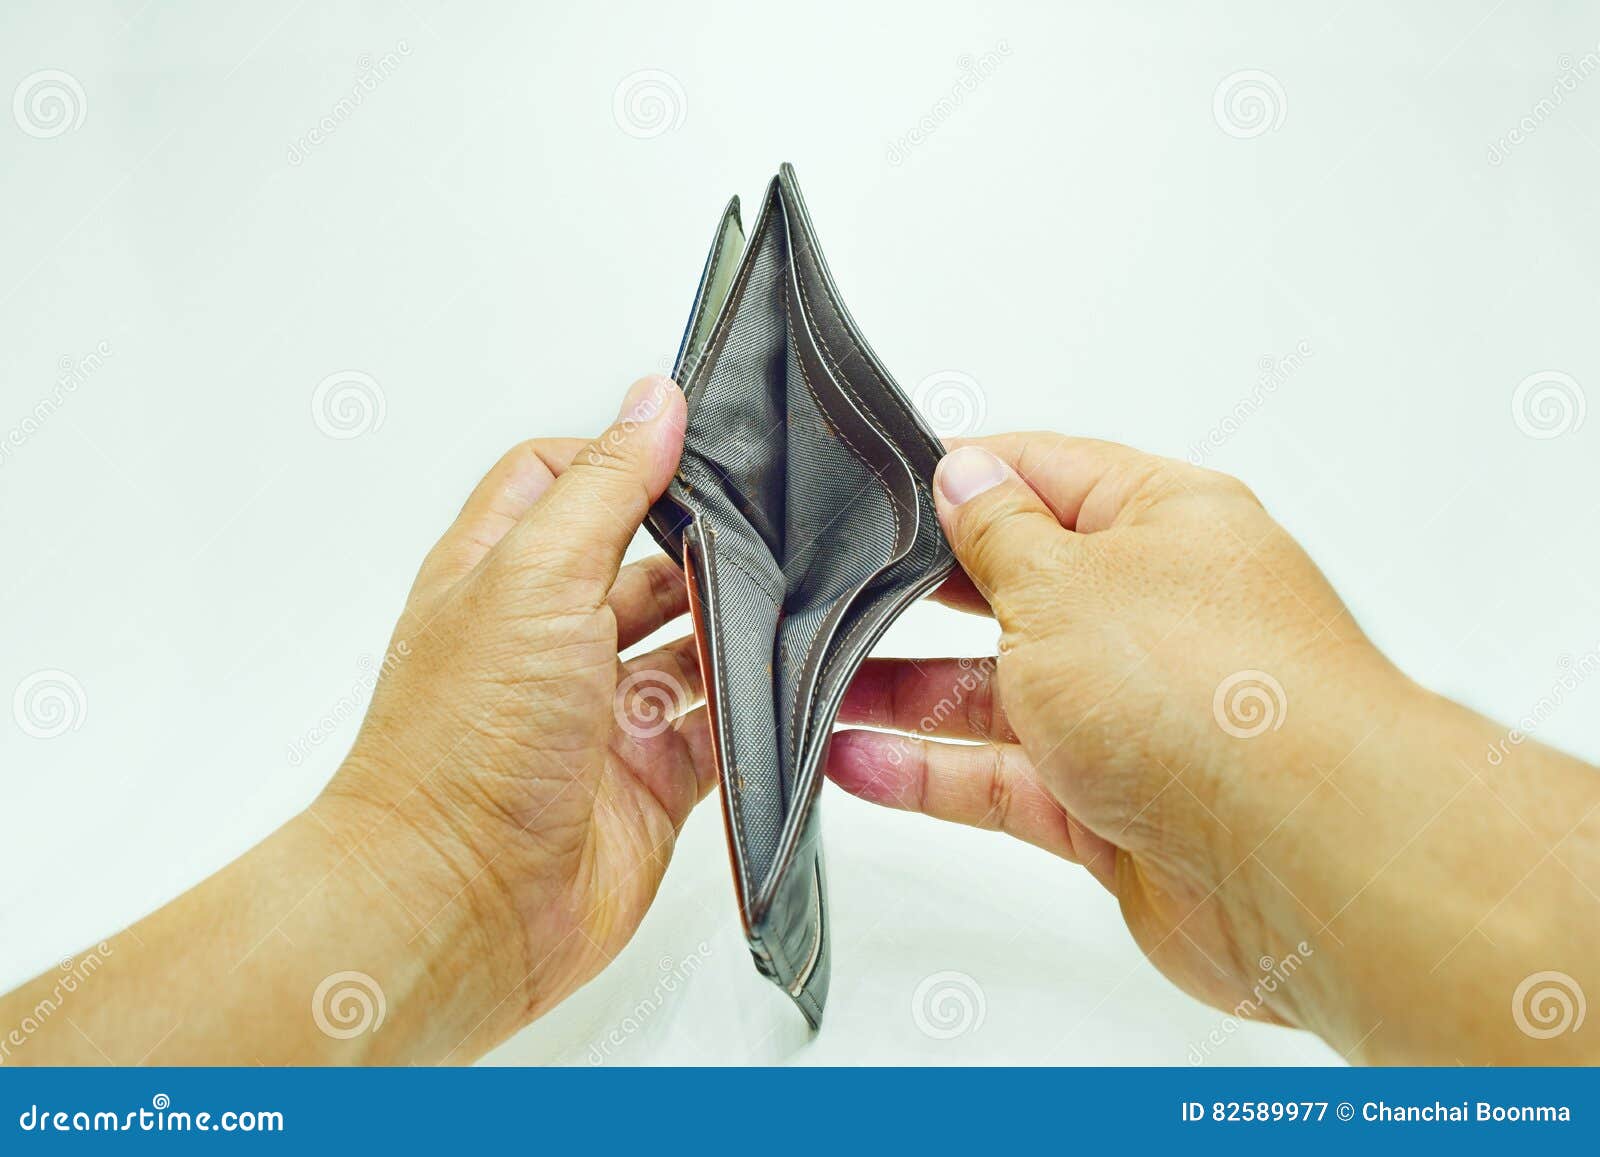 The Girl Holds an Empty Purse in Her Hands. Opened Wallet without Money.  Stock Image - Image of open, bankrupt: 183777219